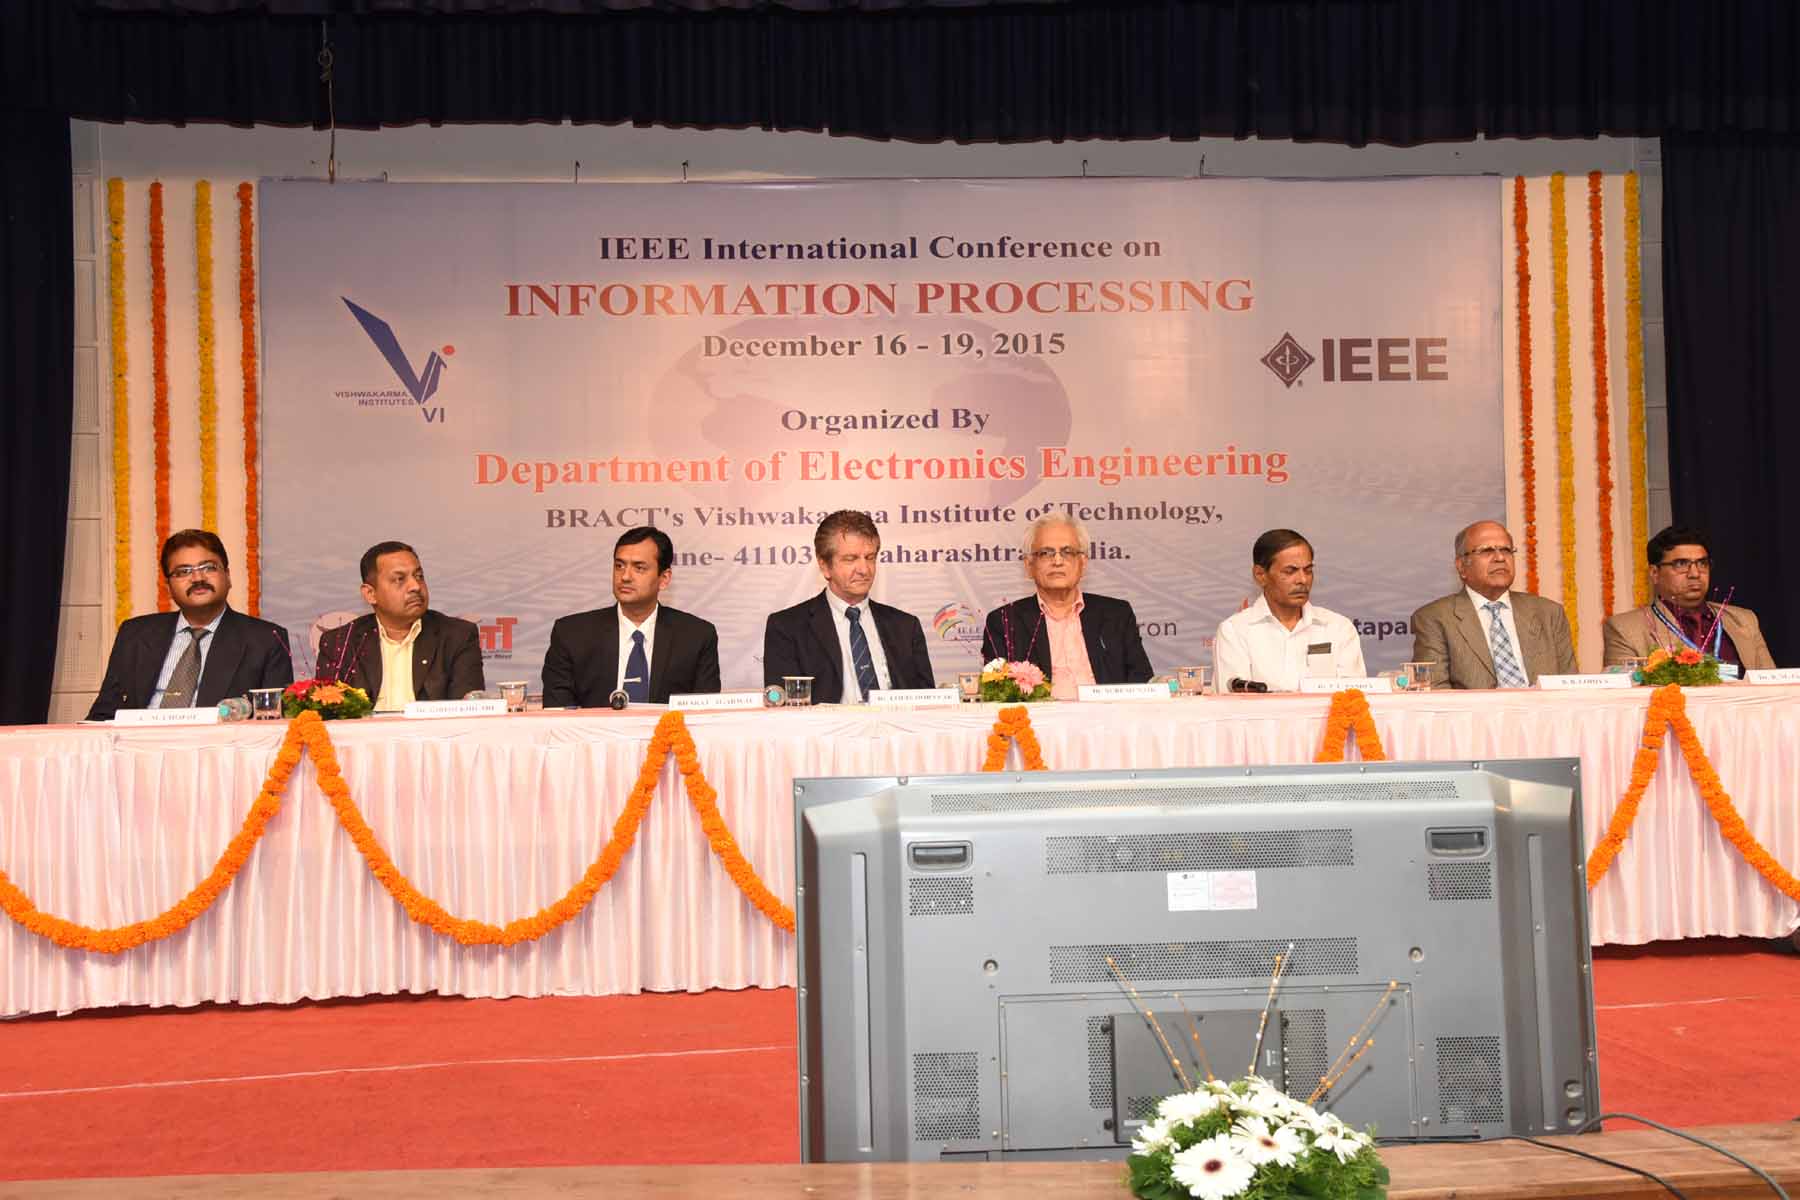 4 day IEEE International Conference on Information Processing held in